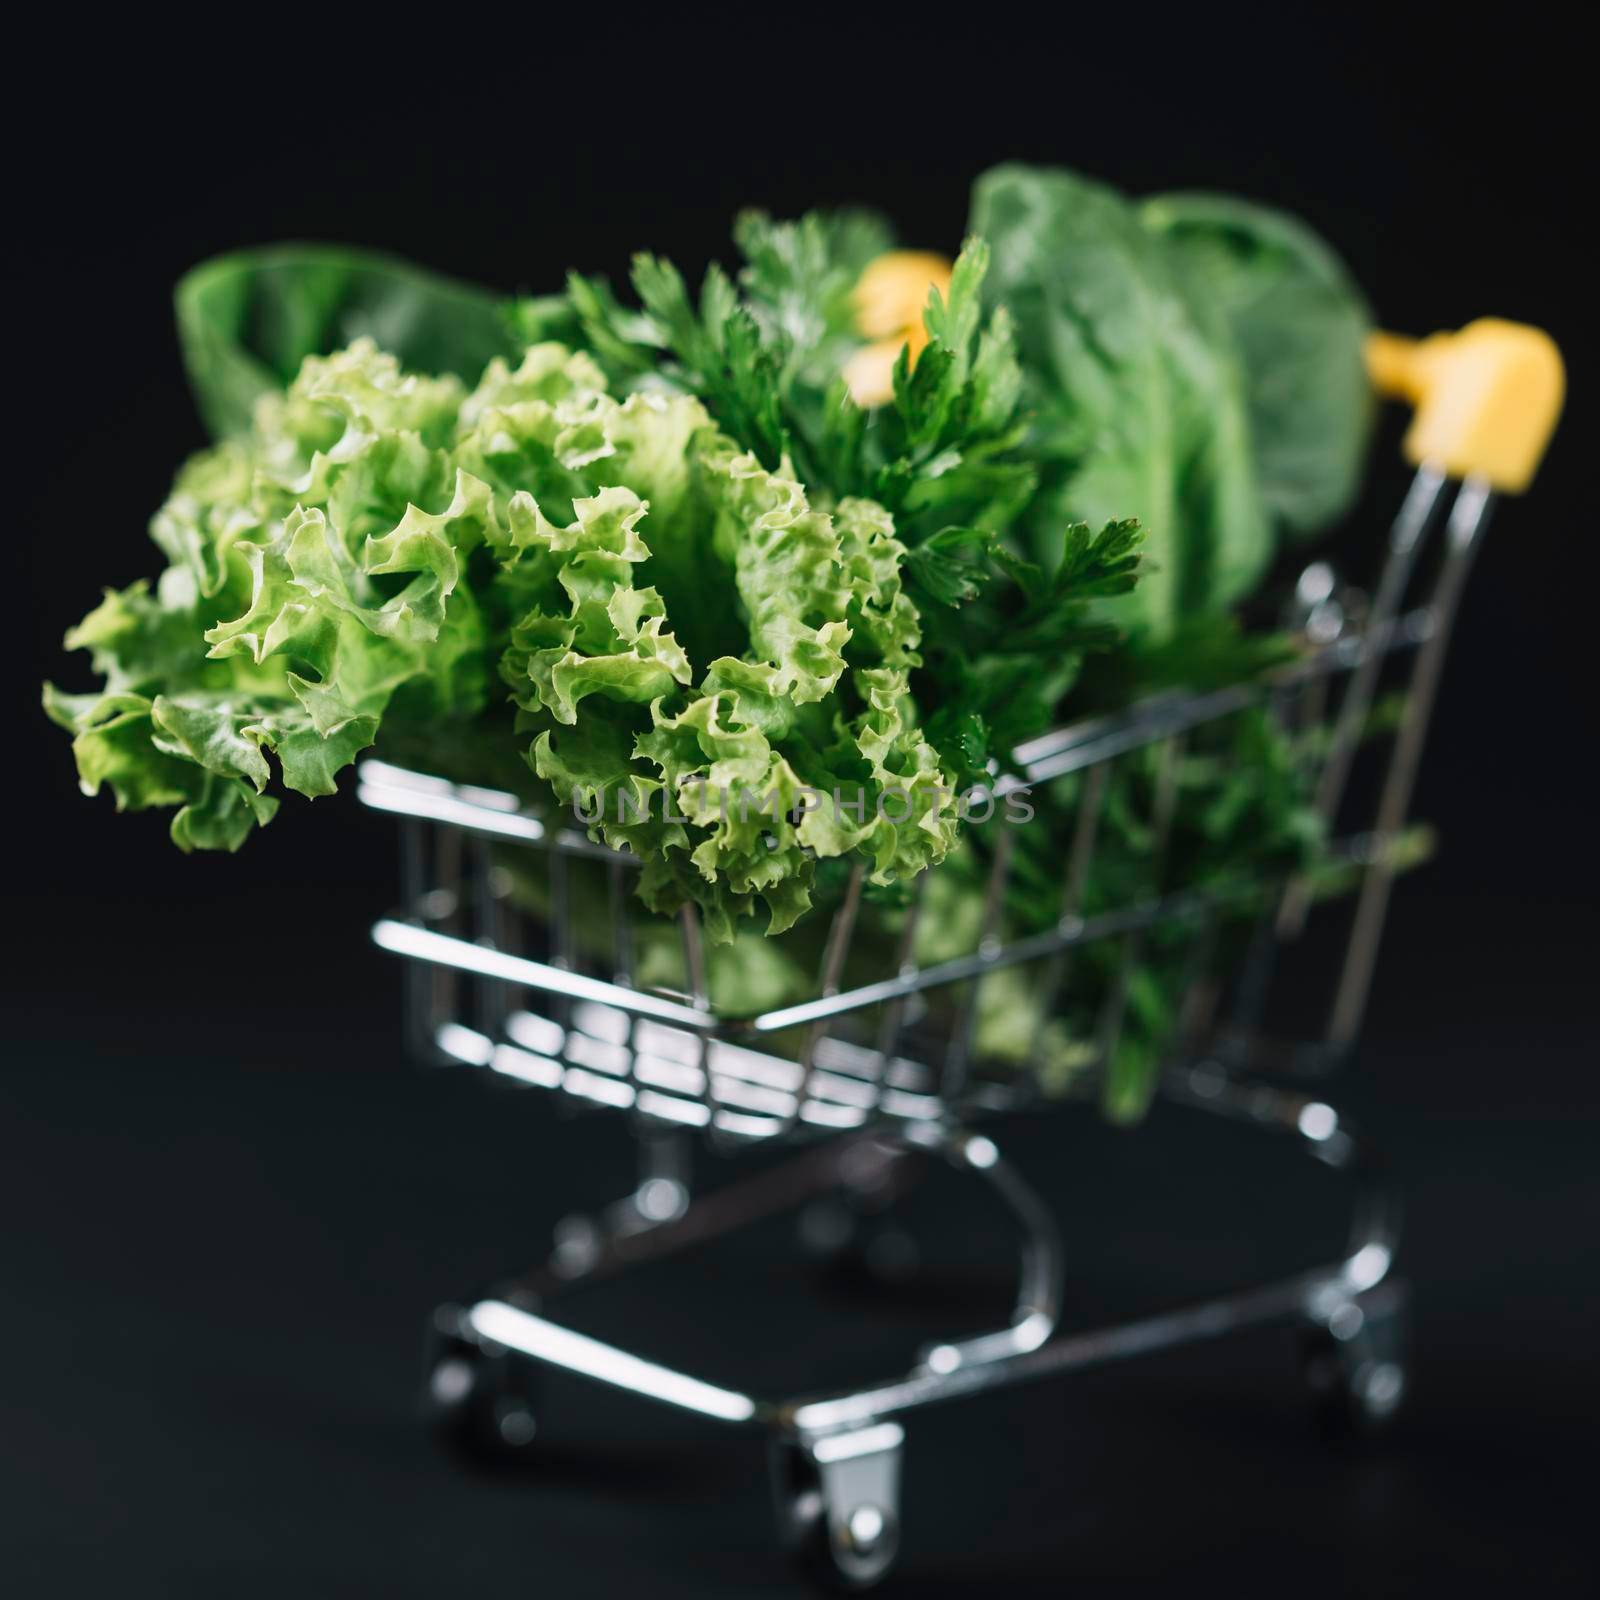 close up green leafy vegetables shopping cart black backdrop. High quality photo by Zahard